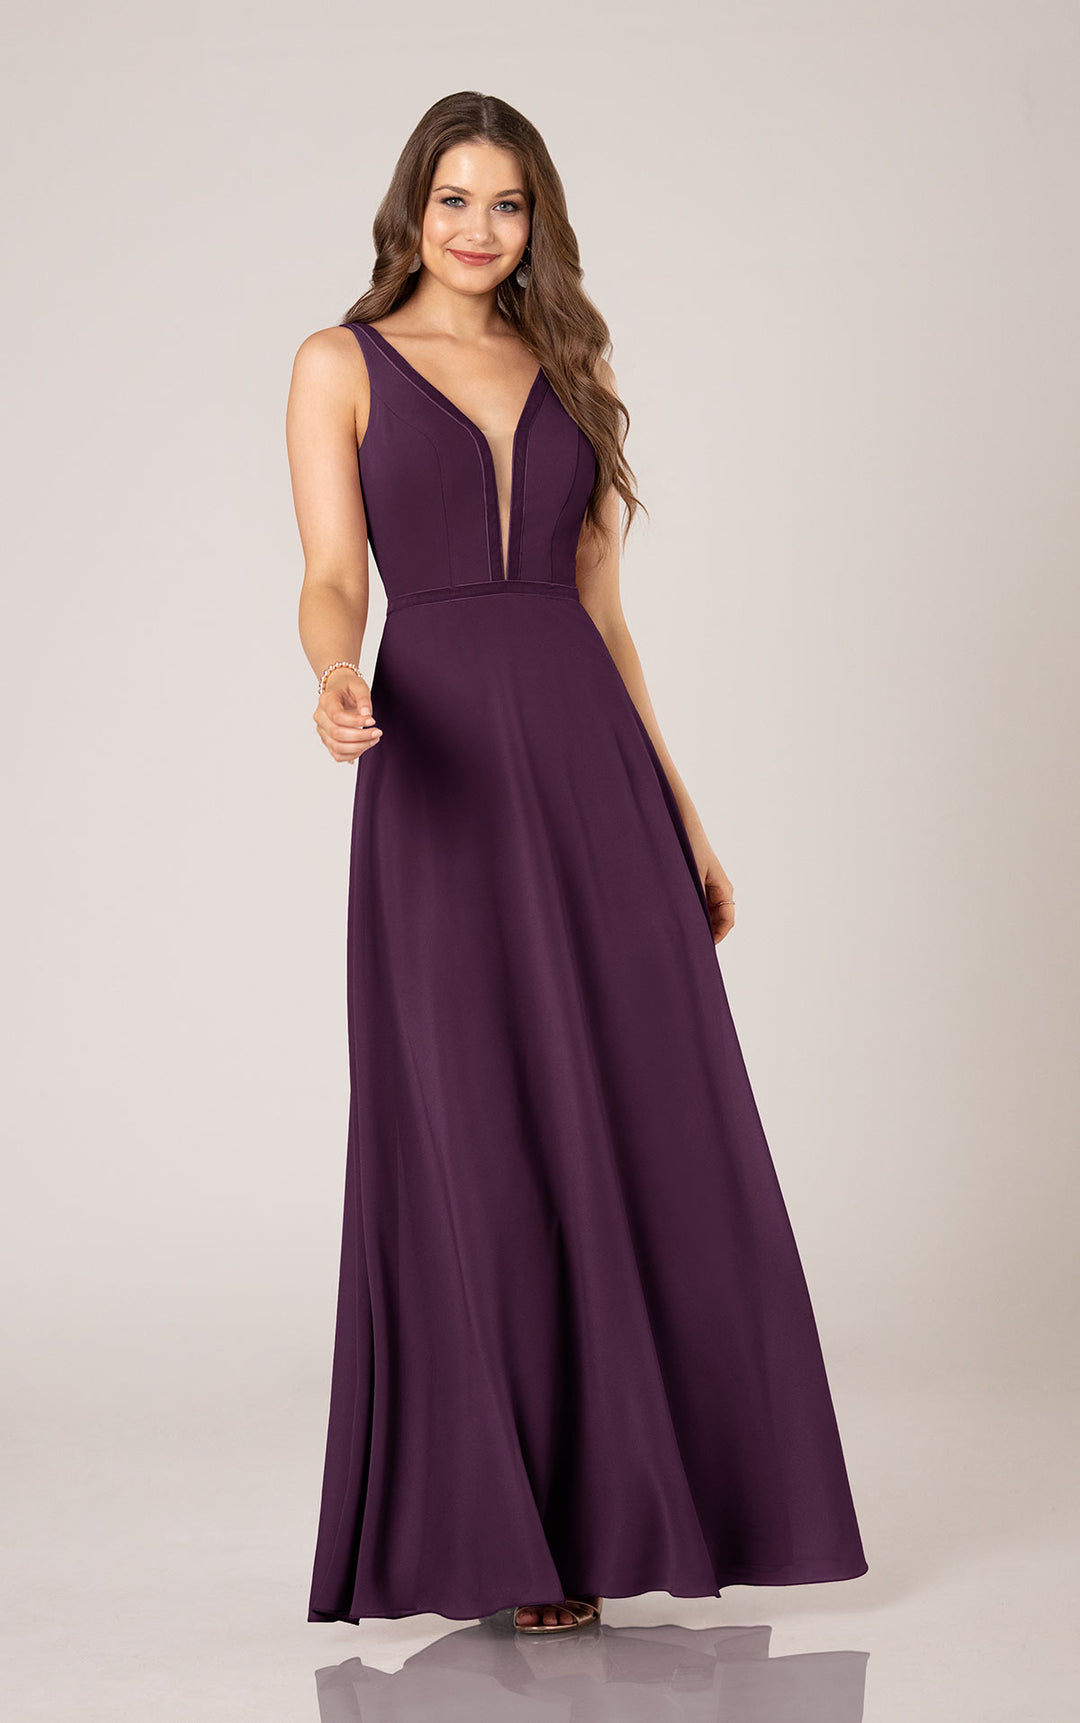 Backless Dress with Velvet Trim Style 9374 Size 12